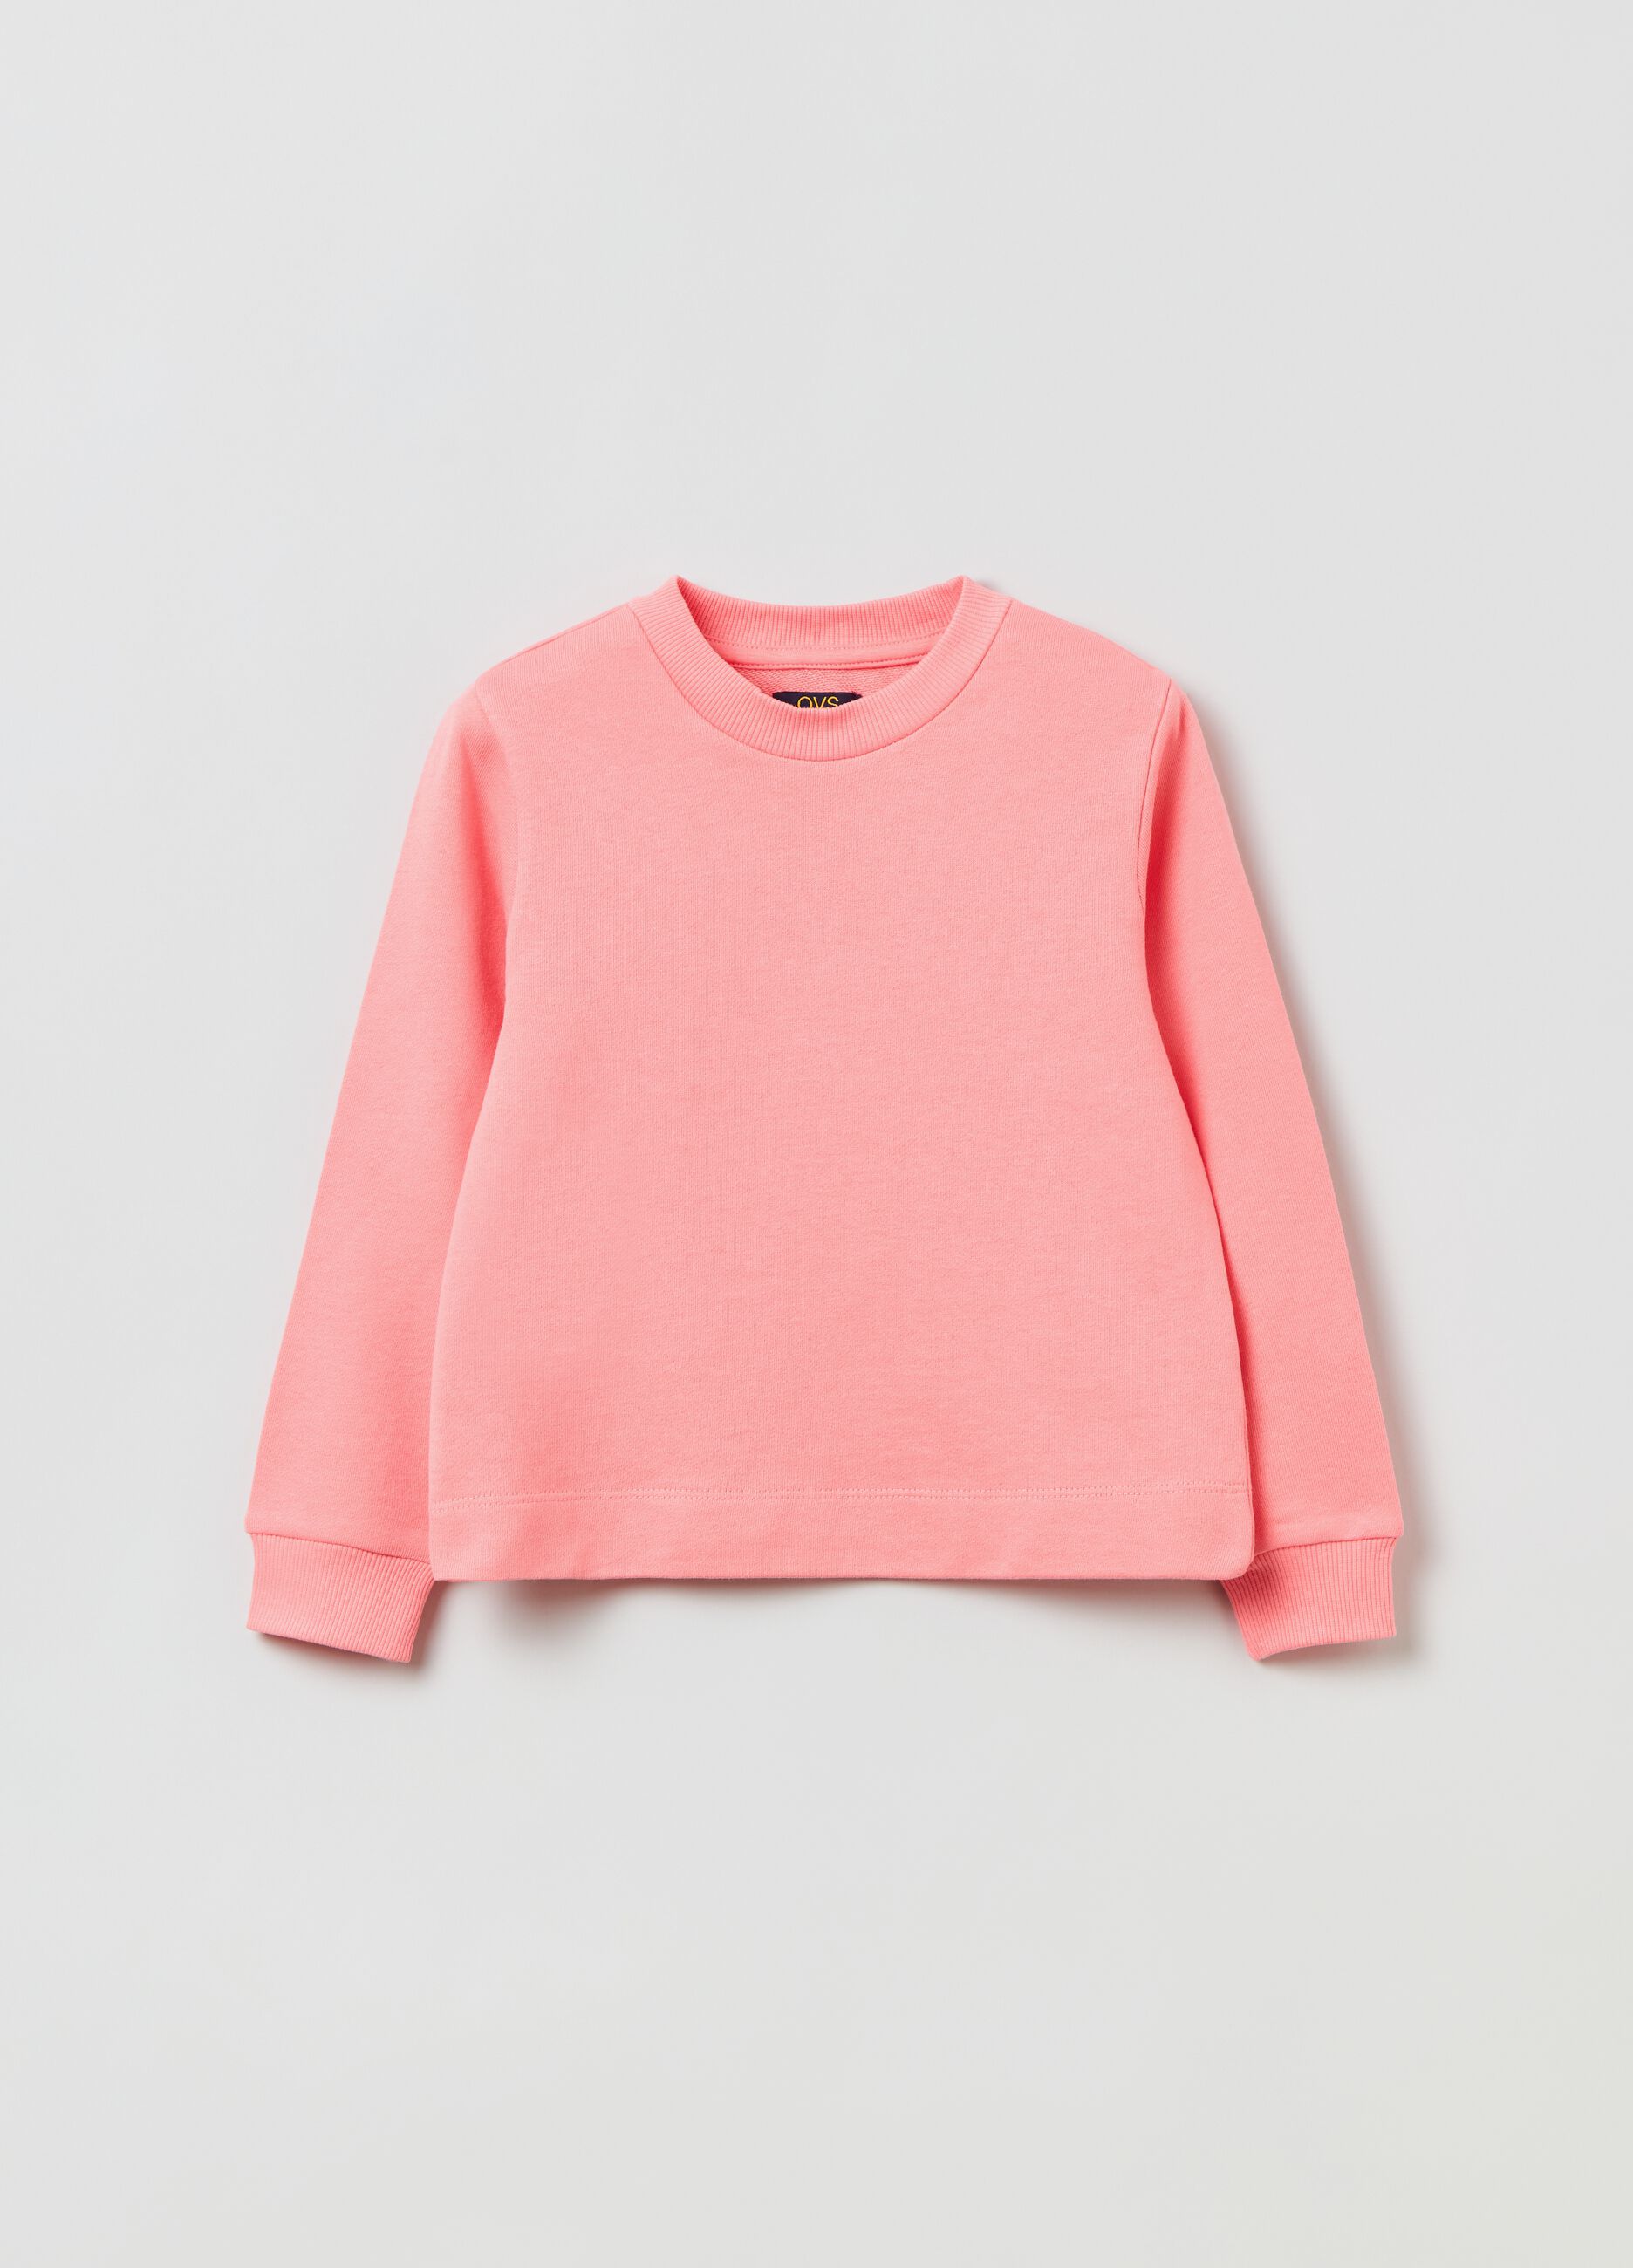 Sweatshirt in French terry with round neck